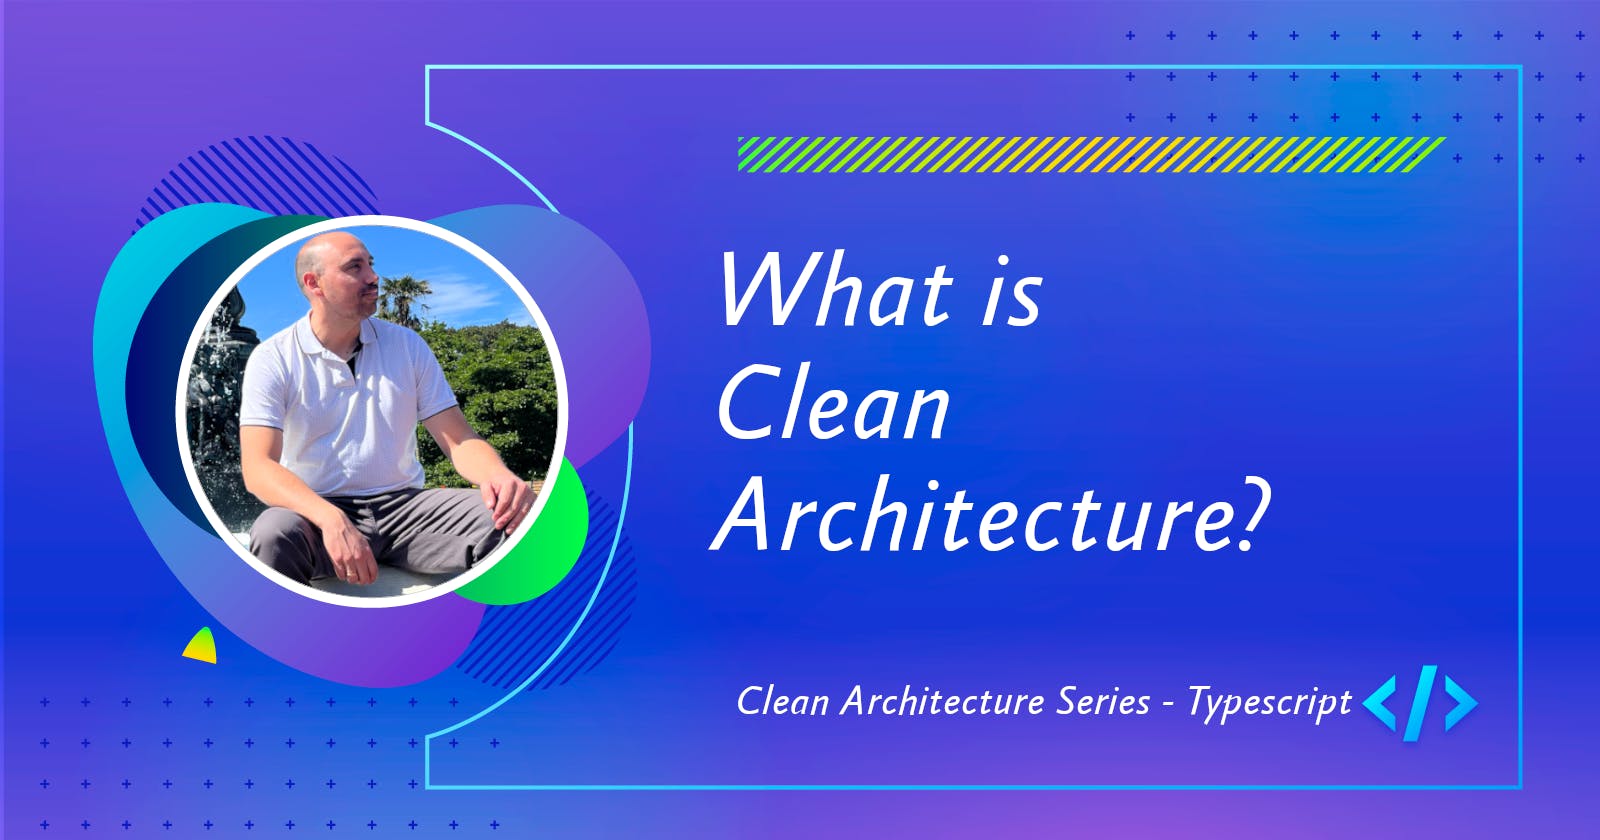 What is Clean Architecture?